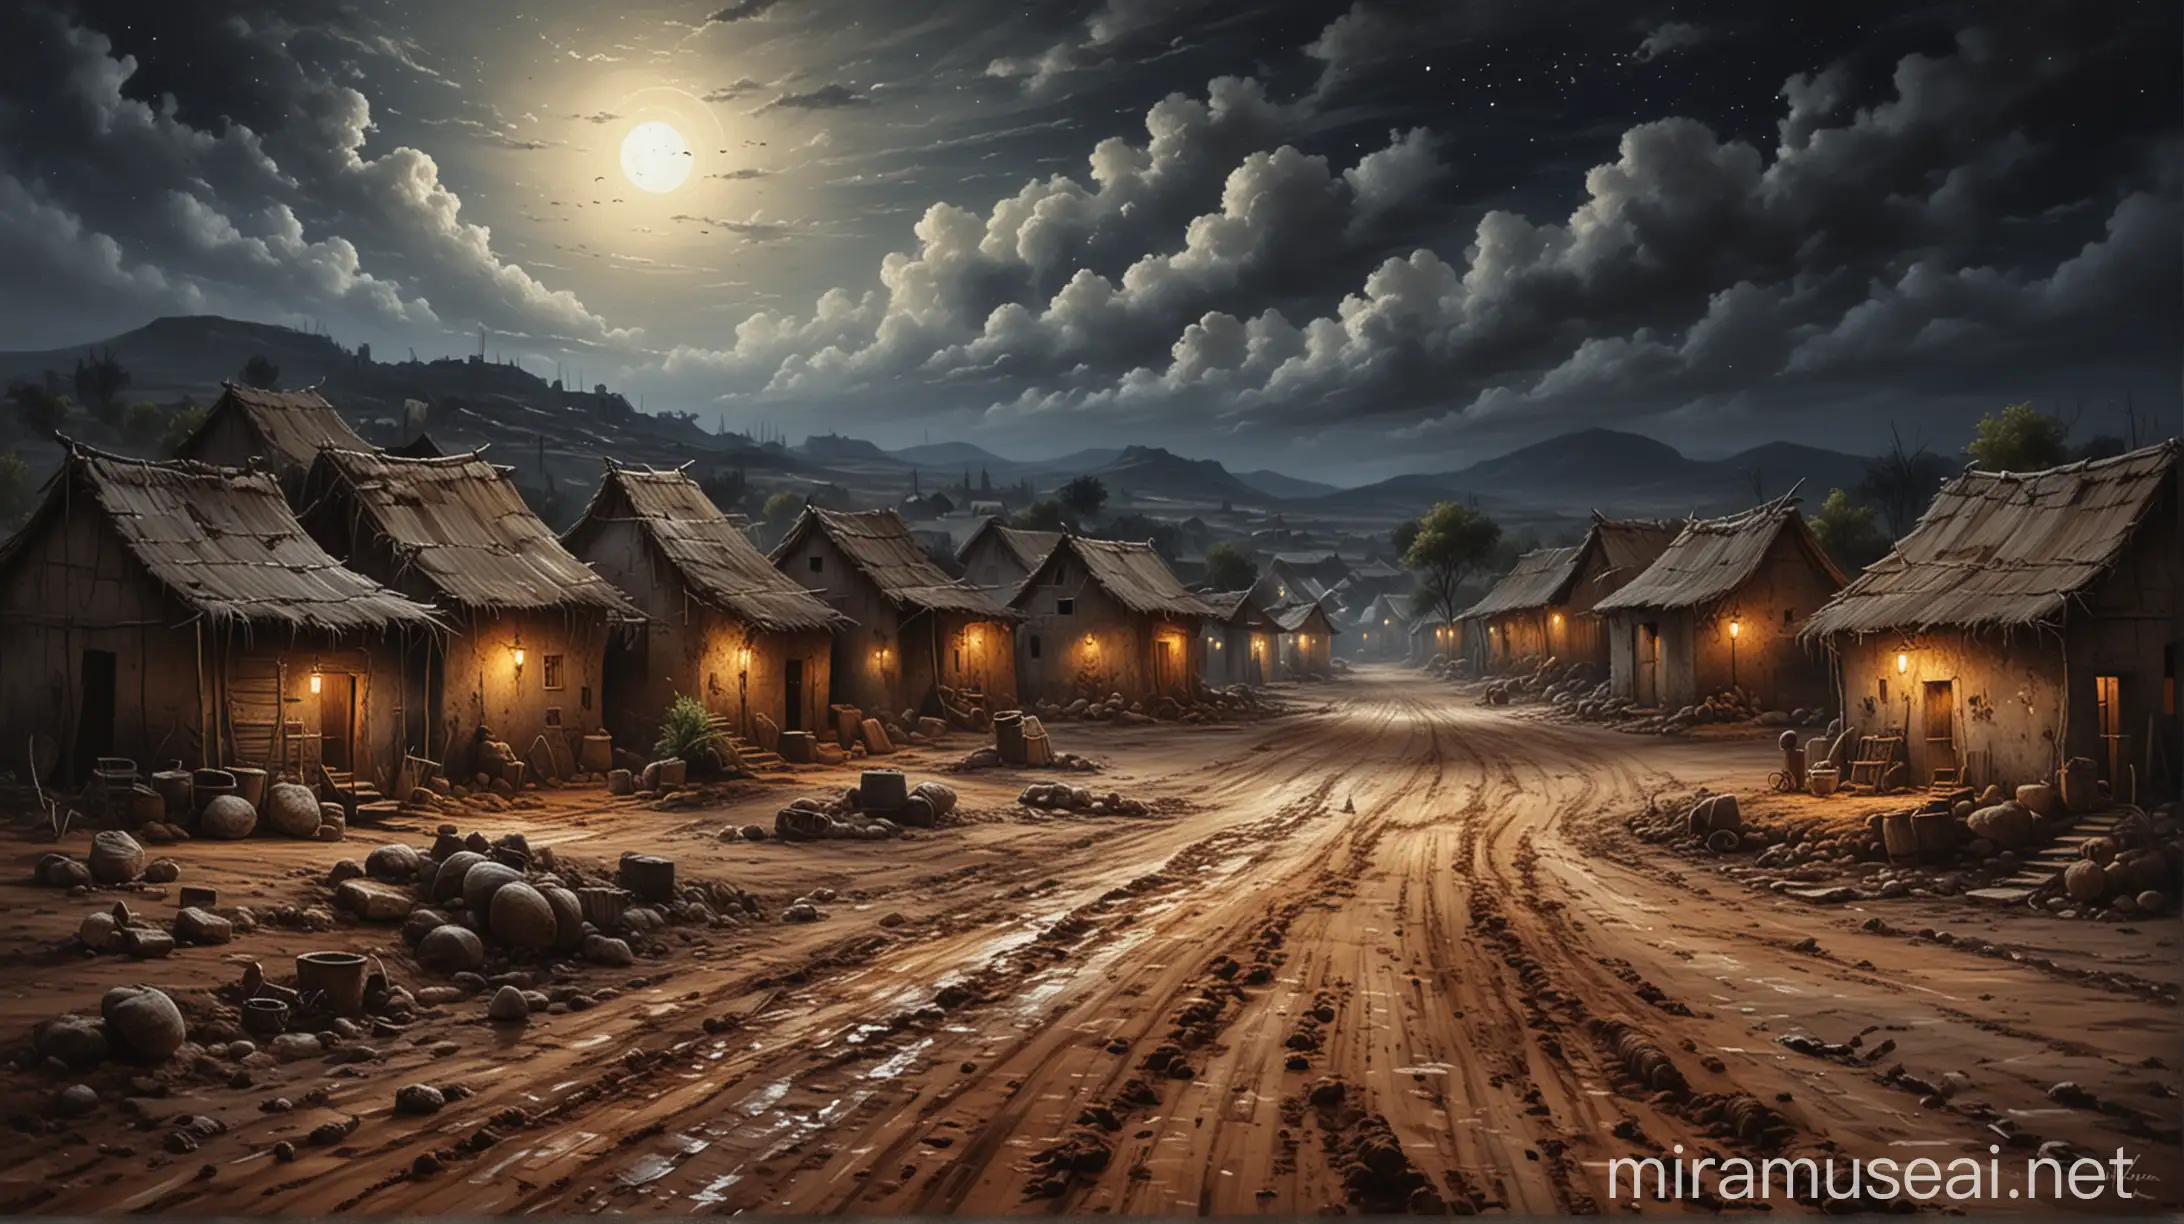 Rural Village at Night Serene Scene Depicted in Oil Painting